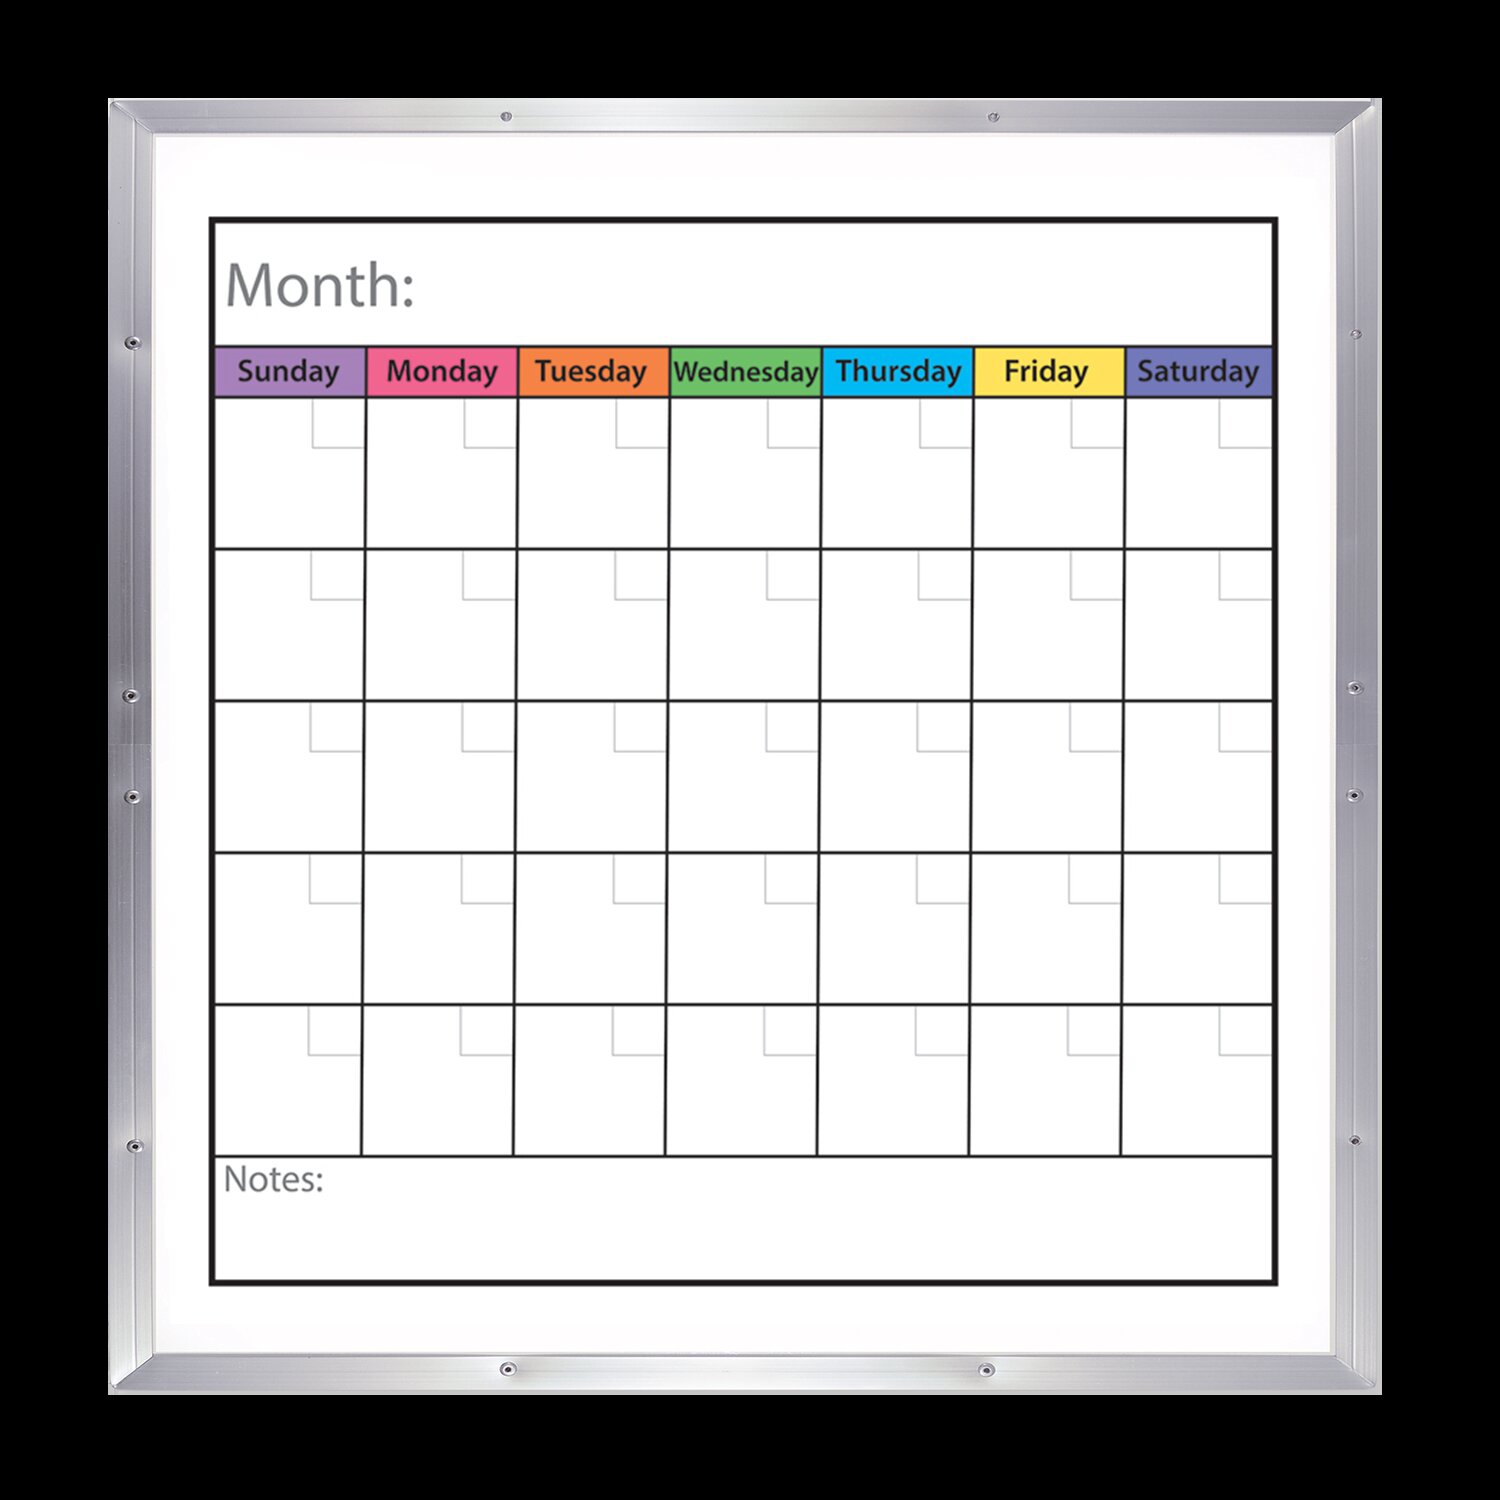 Geyer Instructional Products Tableau blanc mural calendrier